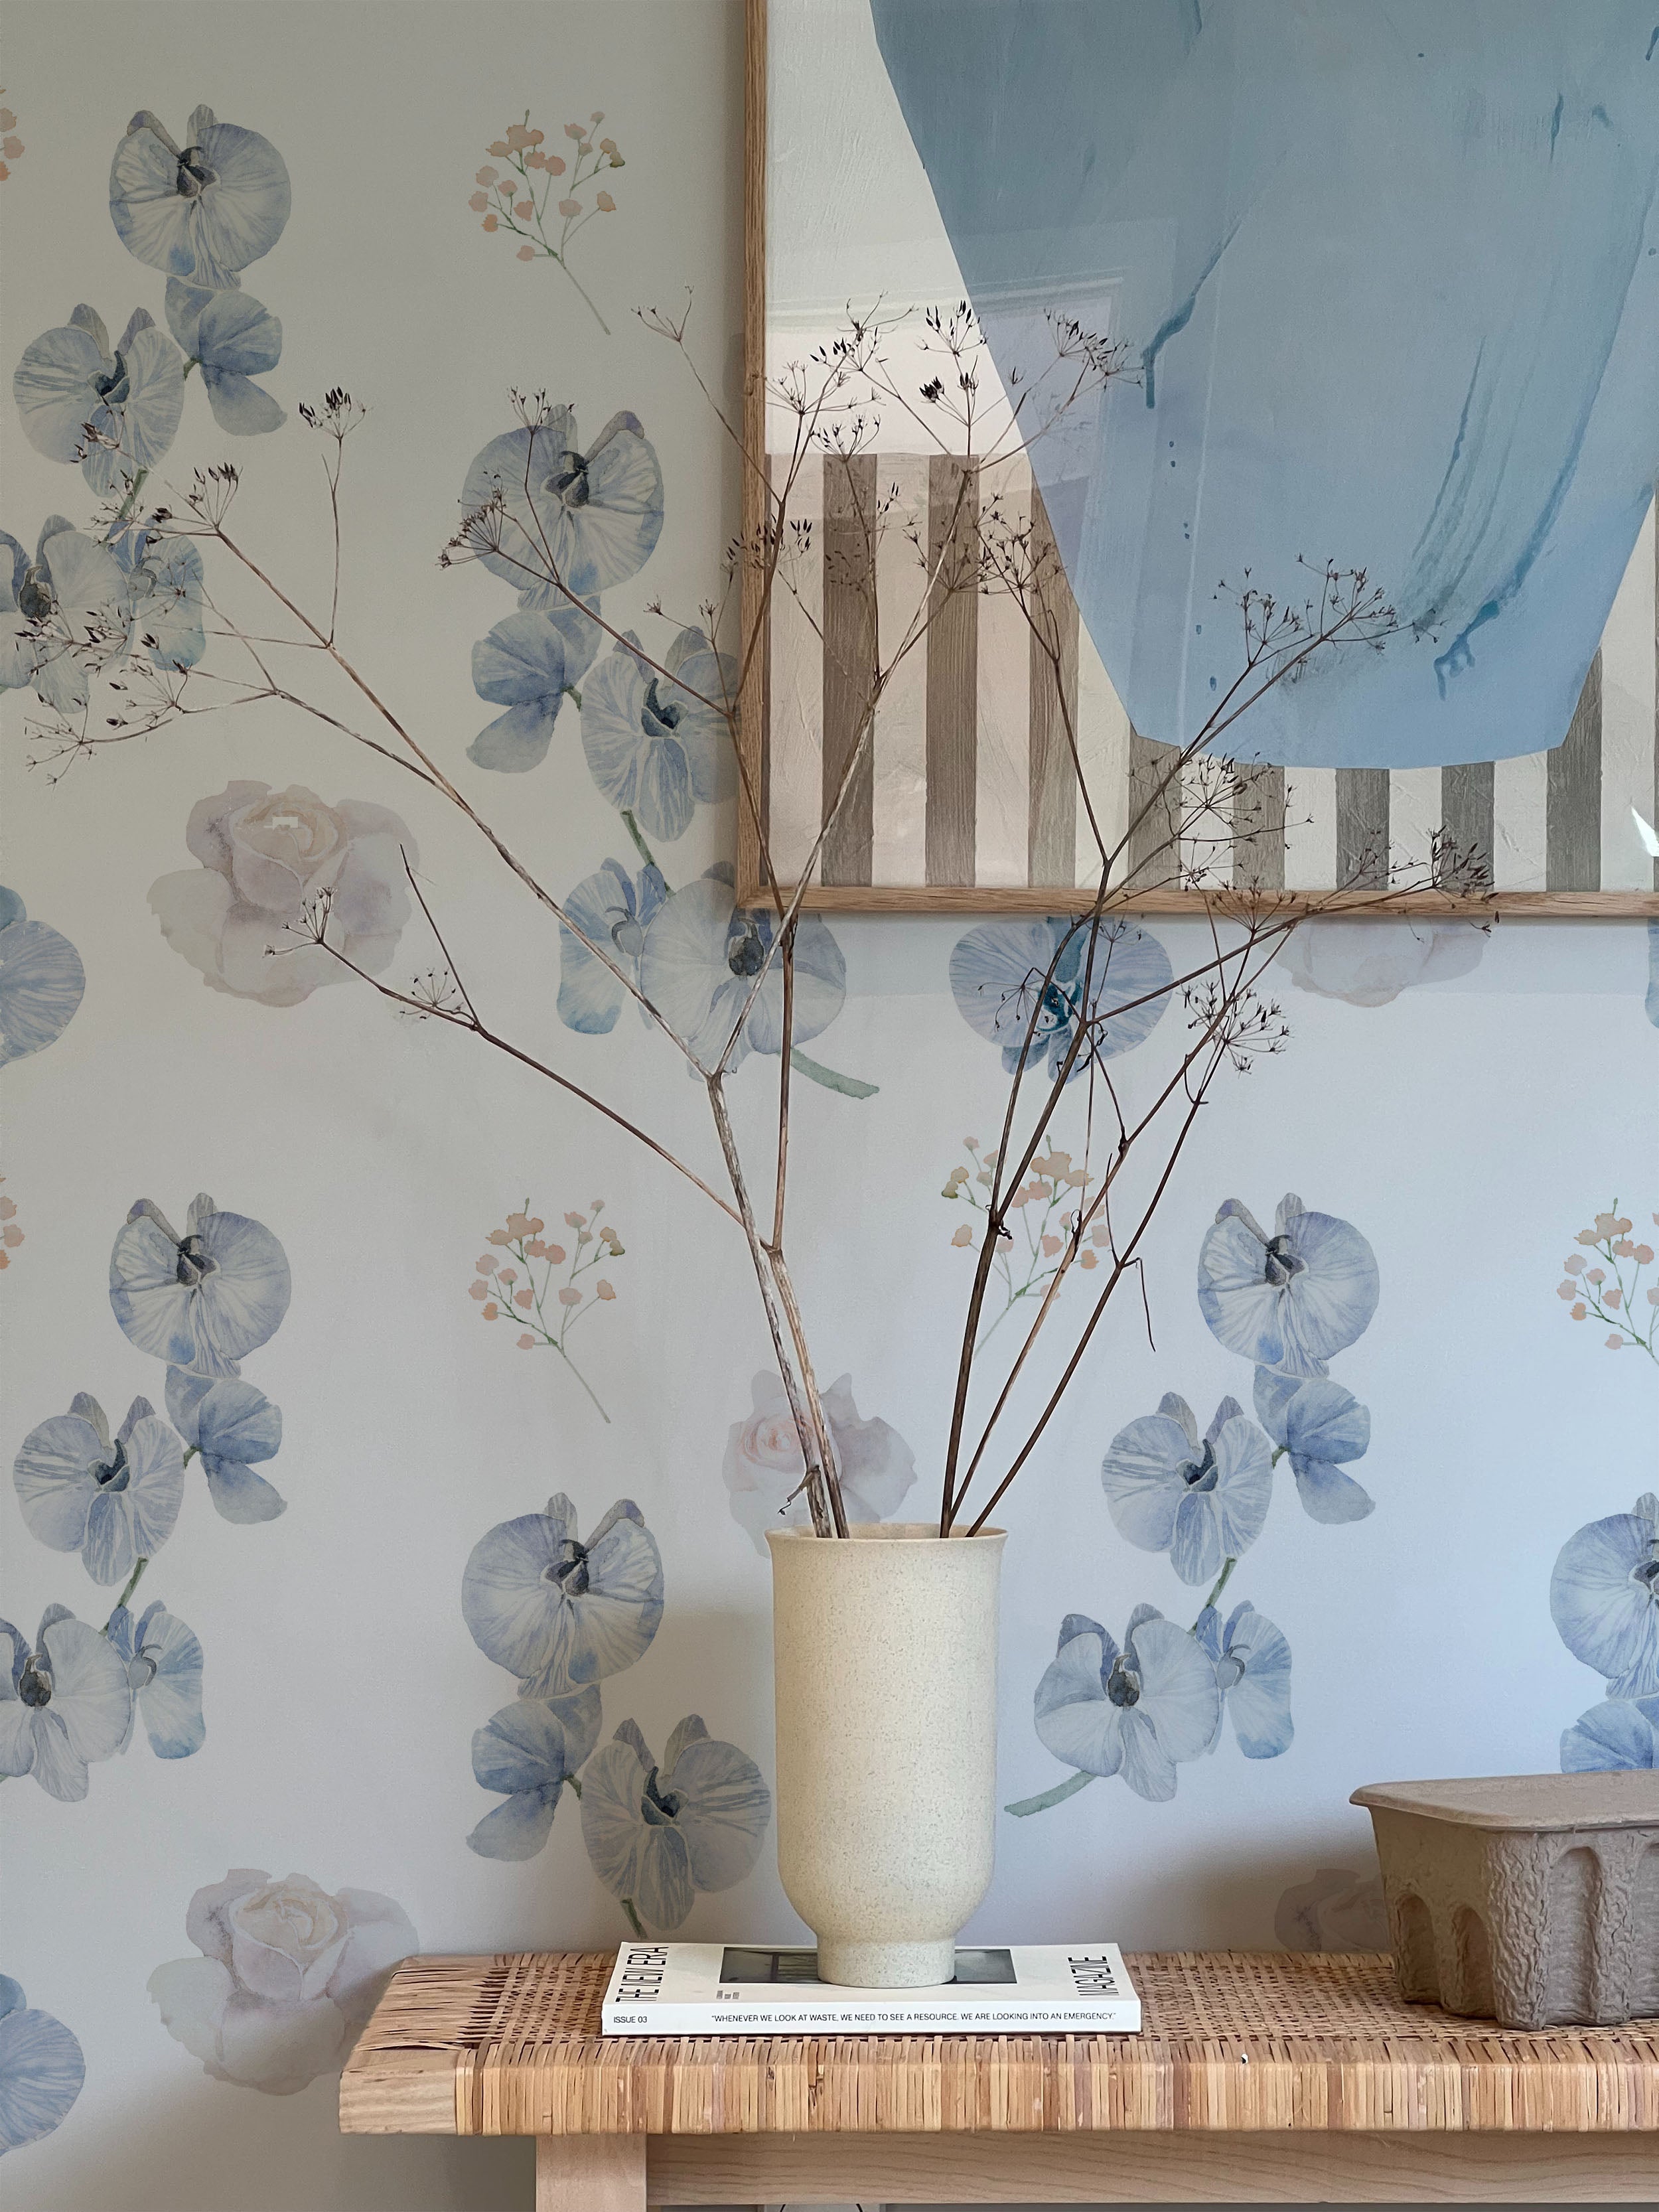 A stylish vignette with a vase of dried flowers on a wooden table against a wall covered in dreamy orchid wallpaper. The wallpaper features a delicate pattern of blue orchids, soft pink roses, and small sprigs of baby's breath on a light background, adding a touch of elegance and serenity to the space. An abstract painting hangs above the table.